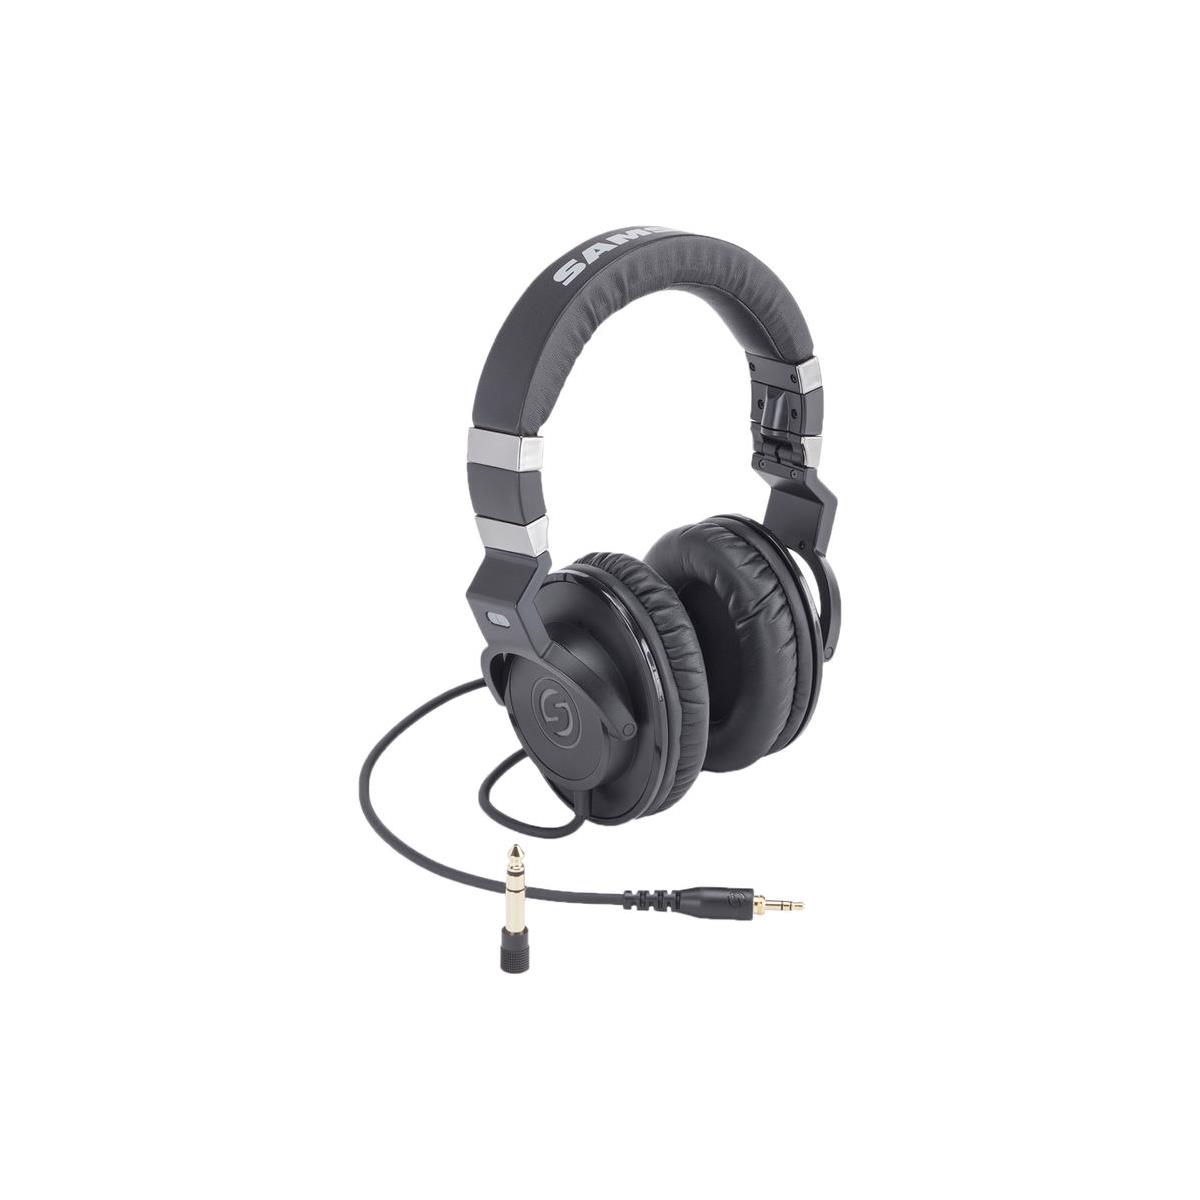 Image of Samson Z35 Studio Headphones with High-Protein Leather Earpads